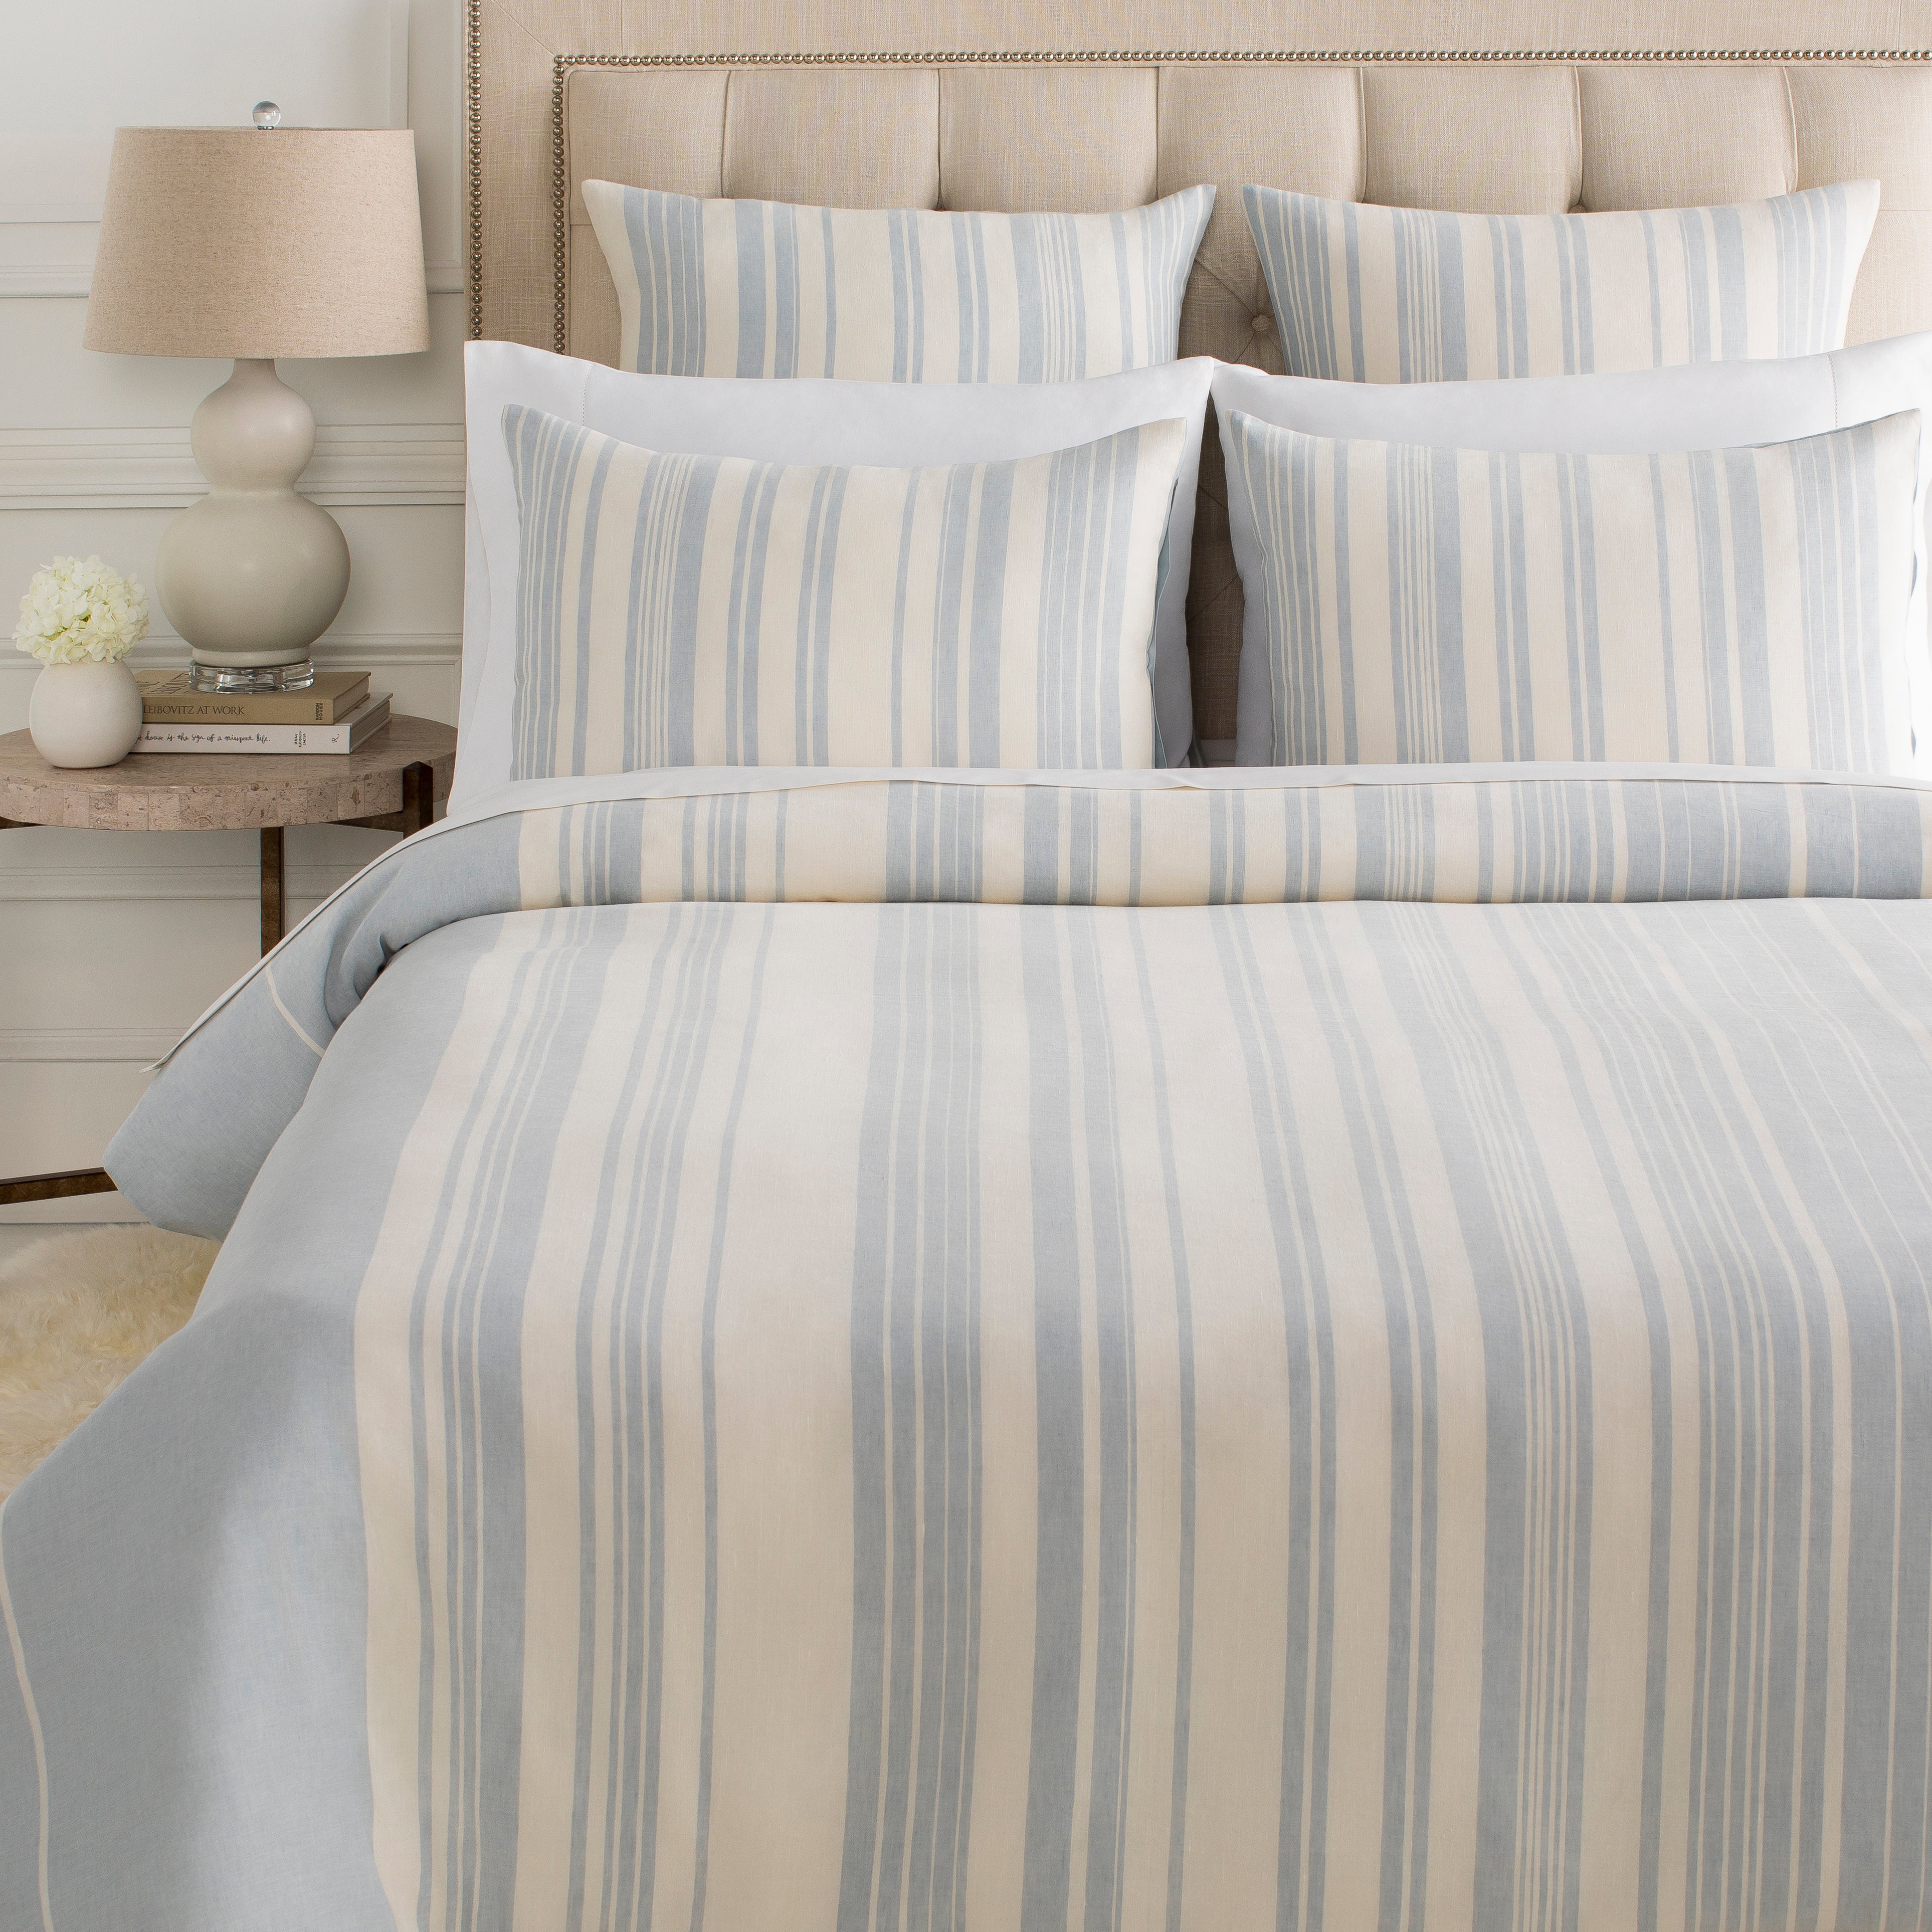 Baris Bedding in Pale Blue and Ivory